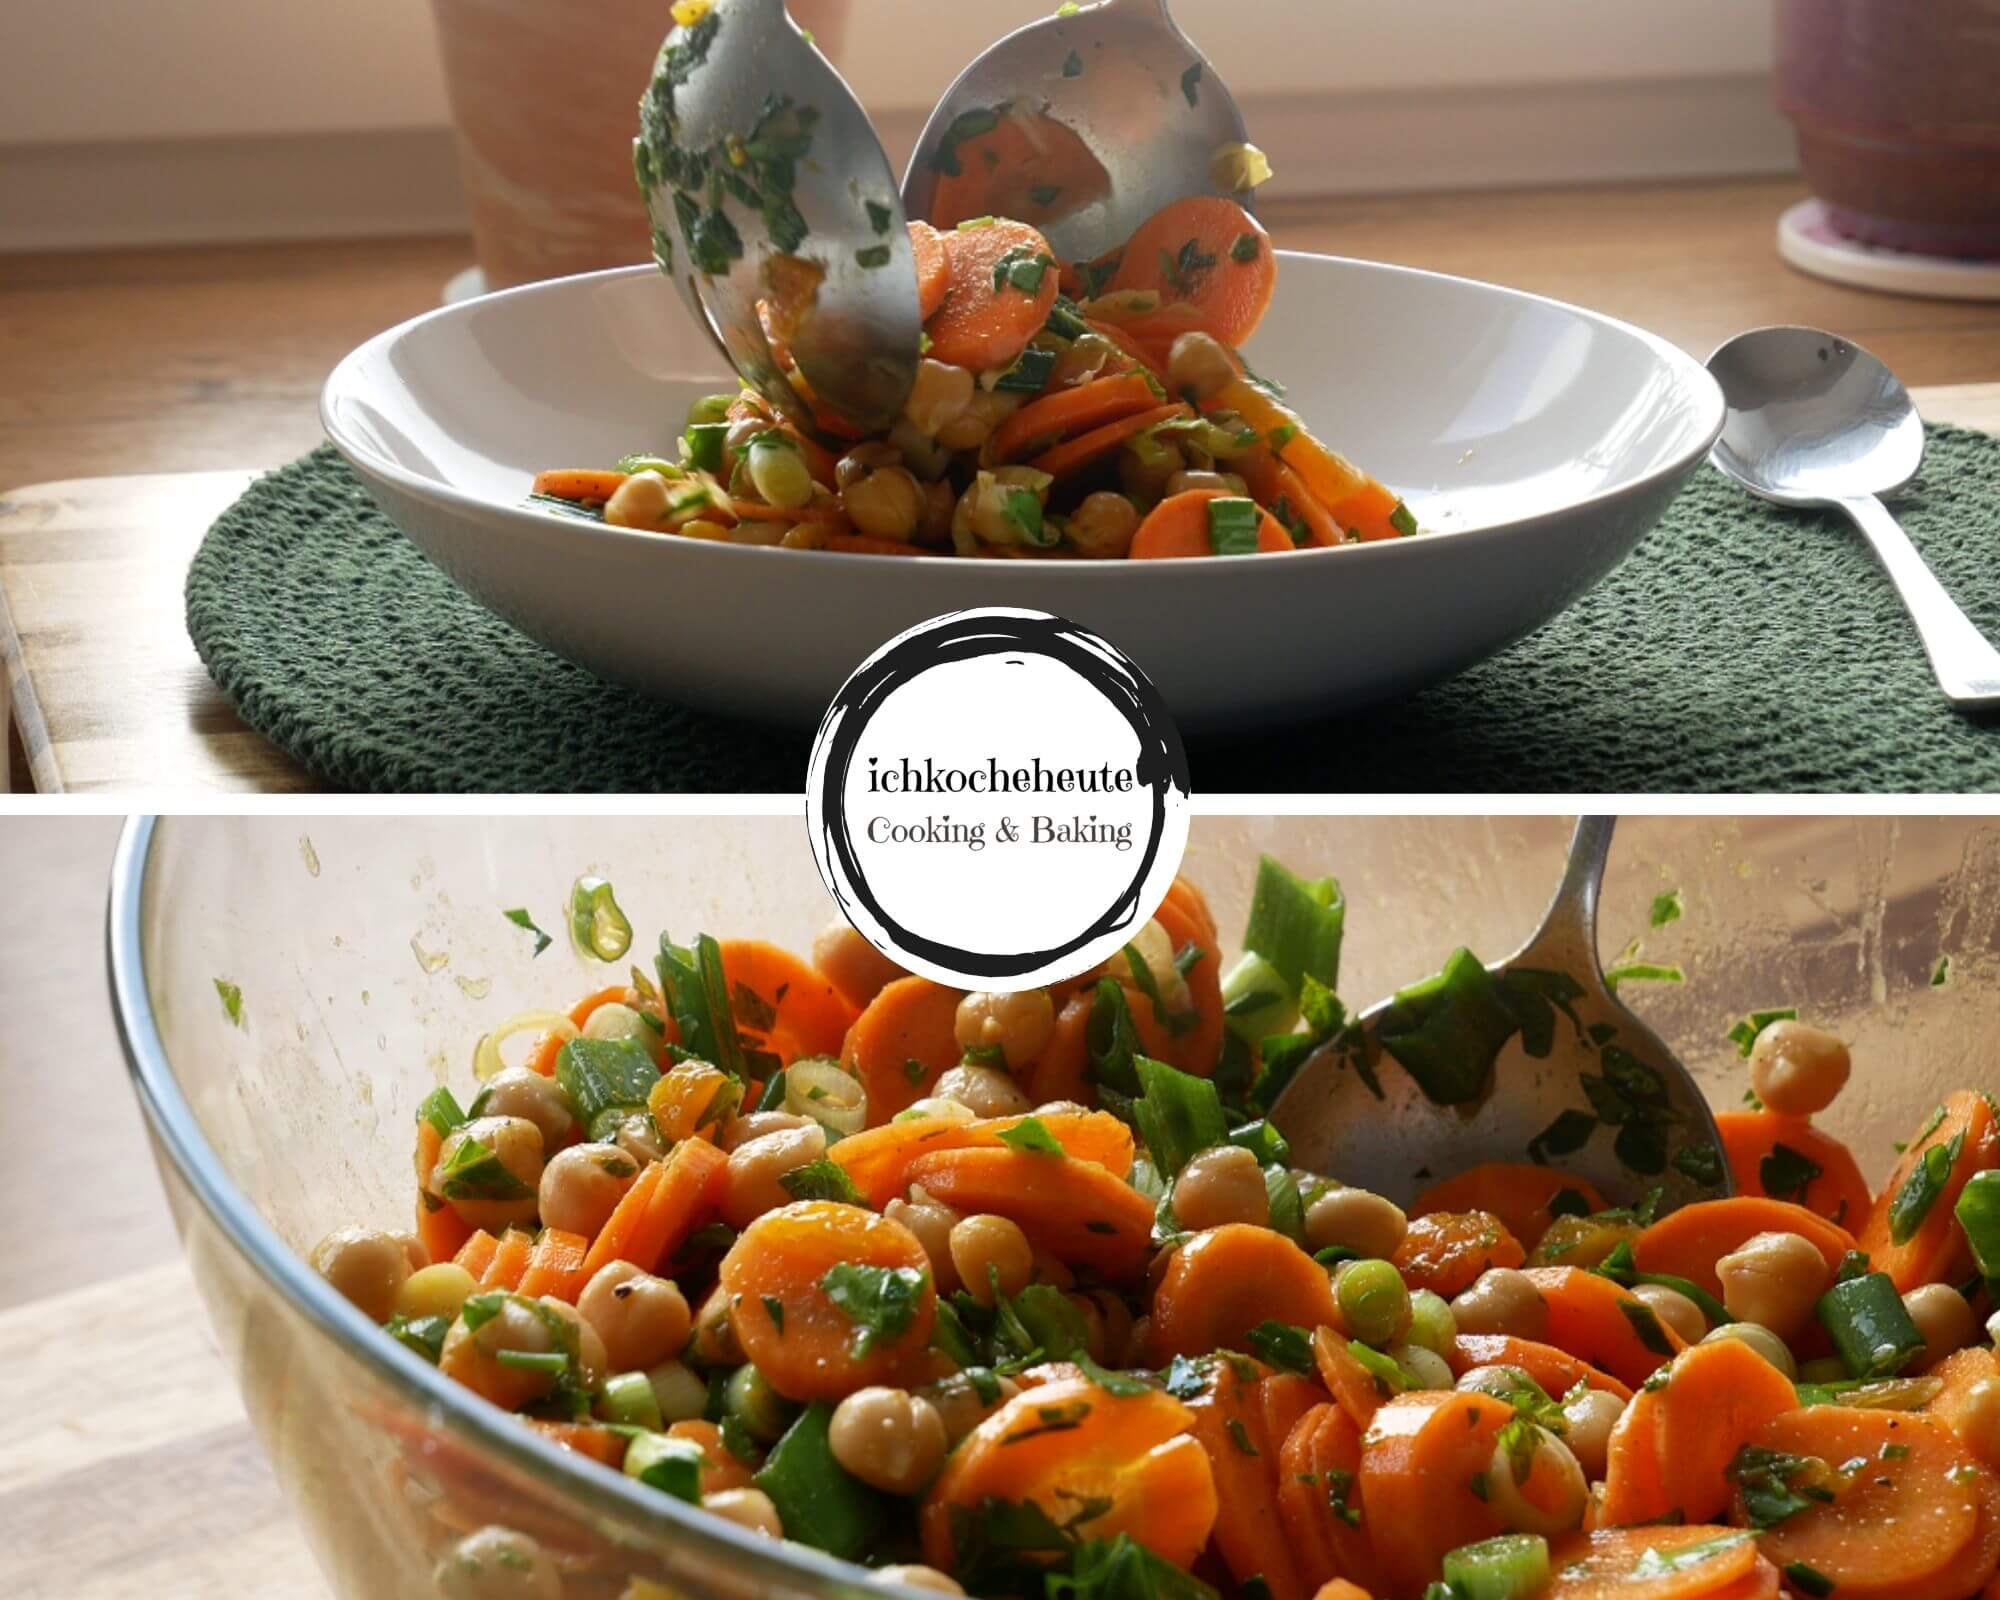 Serving Oriental Carrot Salad with Chickpeas